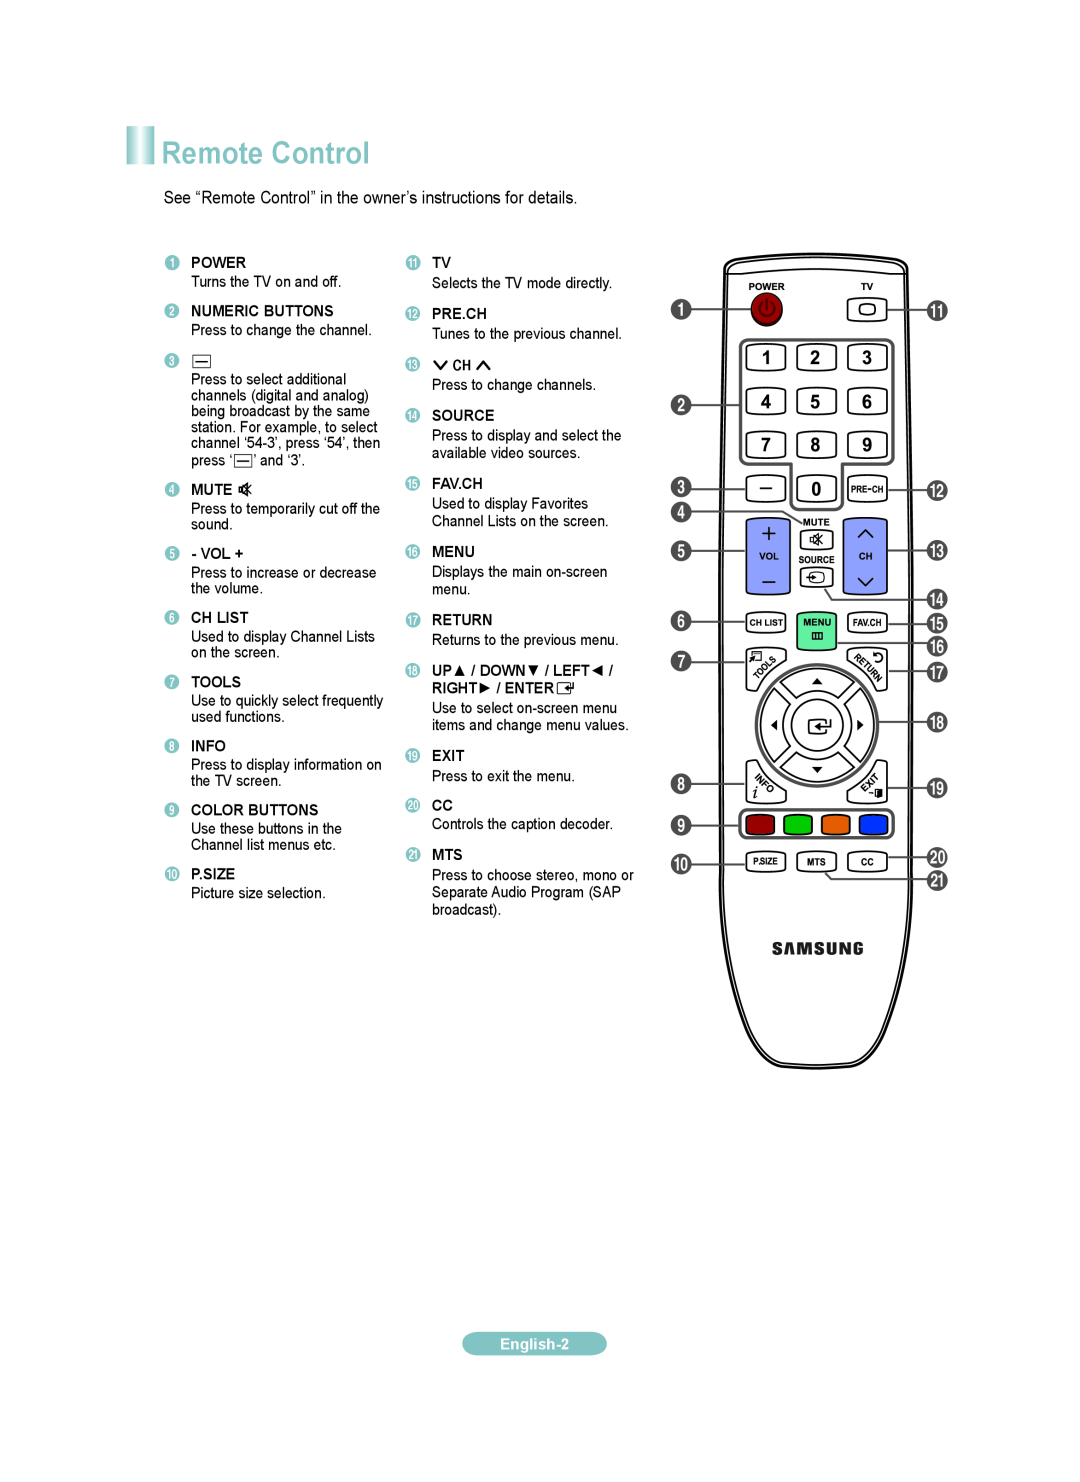 Samsung BN-01J-00, BN68-01976J-00 @ # $, See “Remote Control” in the owner’s instructions for details, English- 